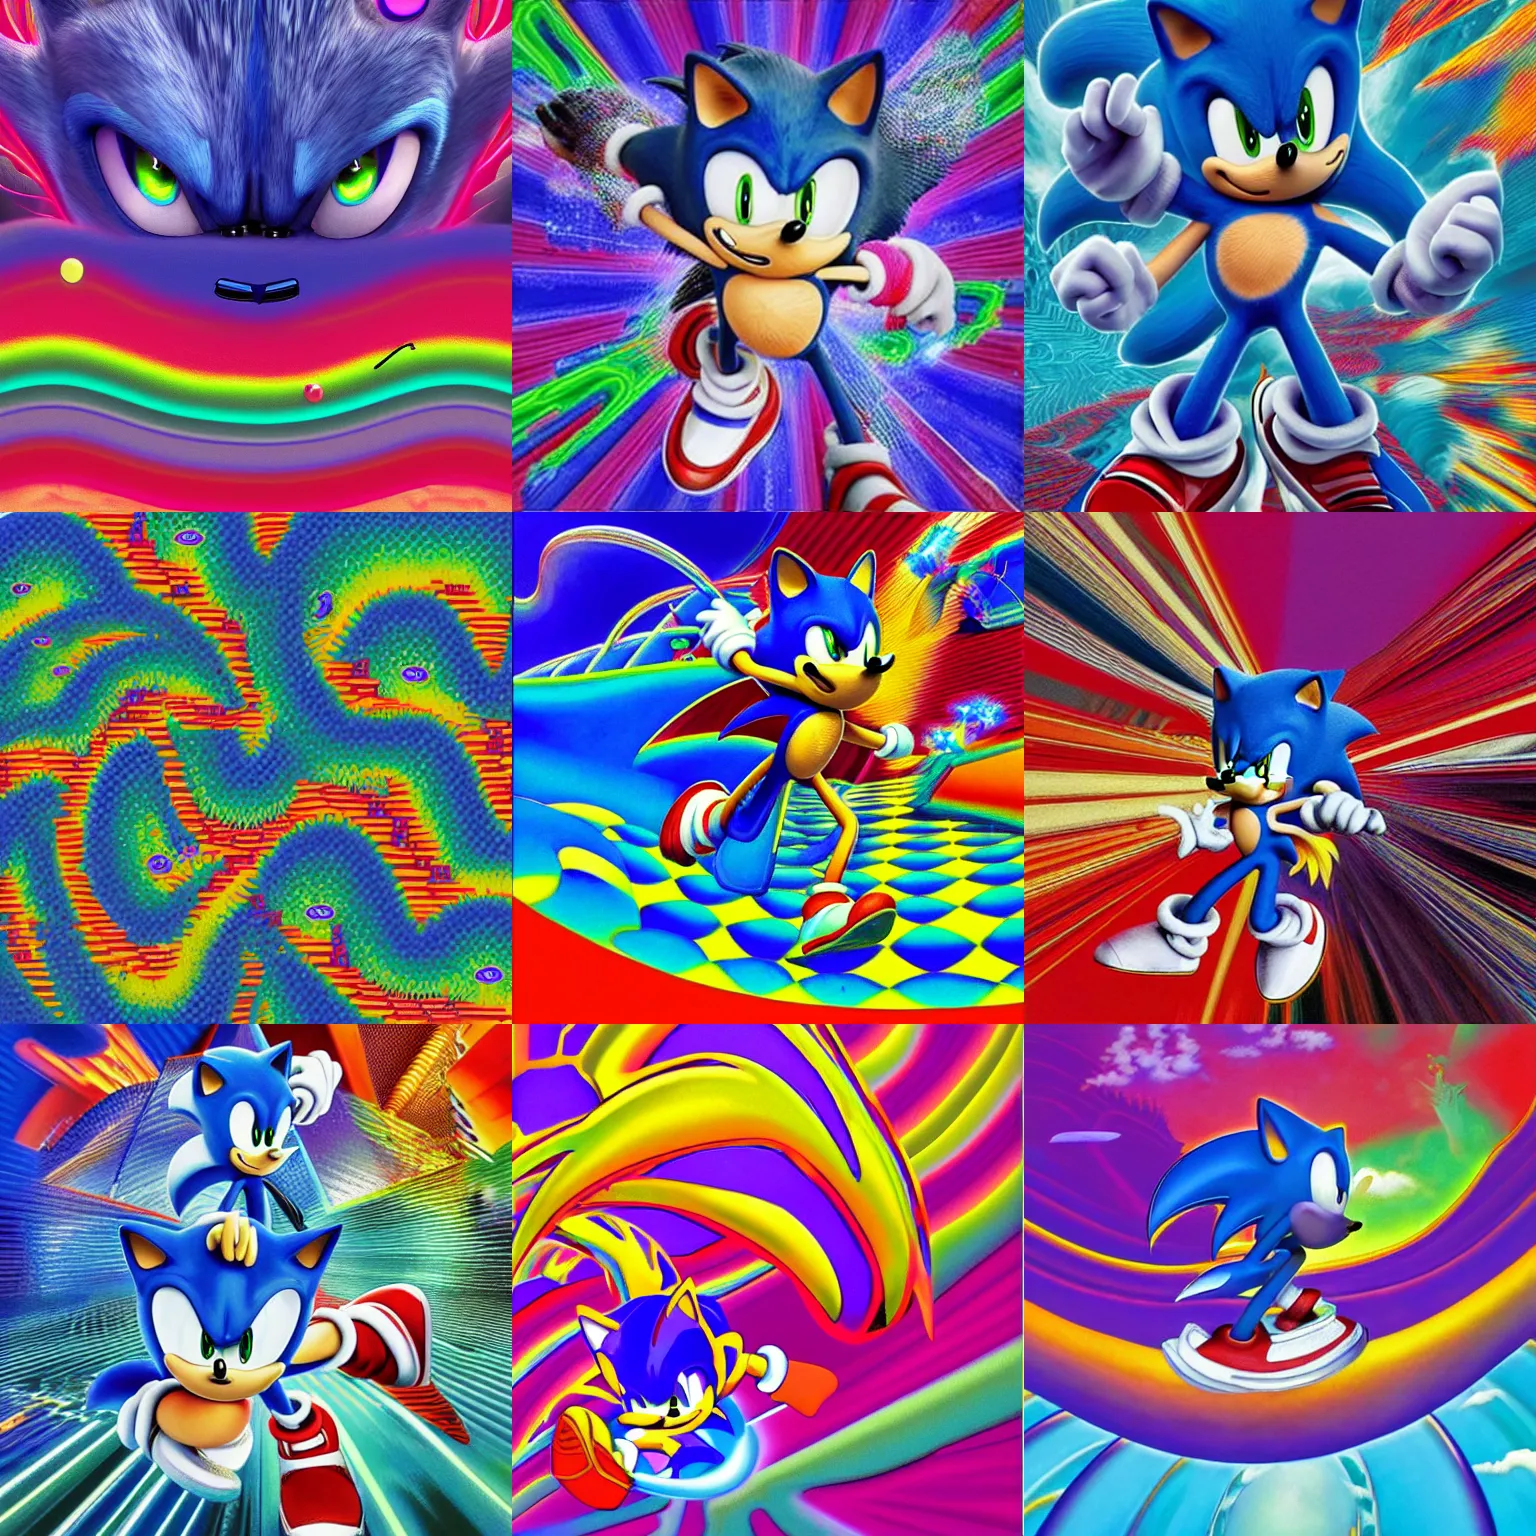 Prompt: sonic the hedgehog in a recursive surreal, sharp, detailed professional, high quality airbrush art MGMT tame impala album cover of a liquid dissolving LSD DMT sonic the hedgehog surfing through cyberspace, purple checkerboard background, 1990s 1992 Sega Genesis video game album cover,